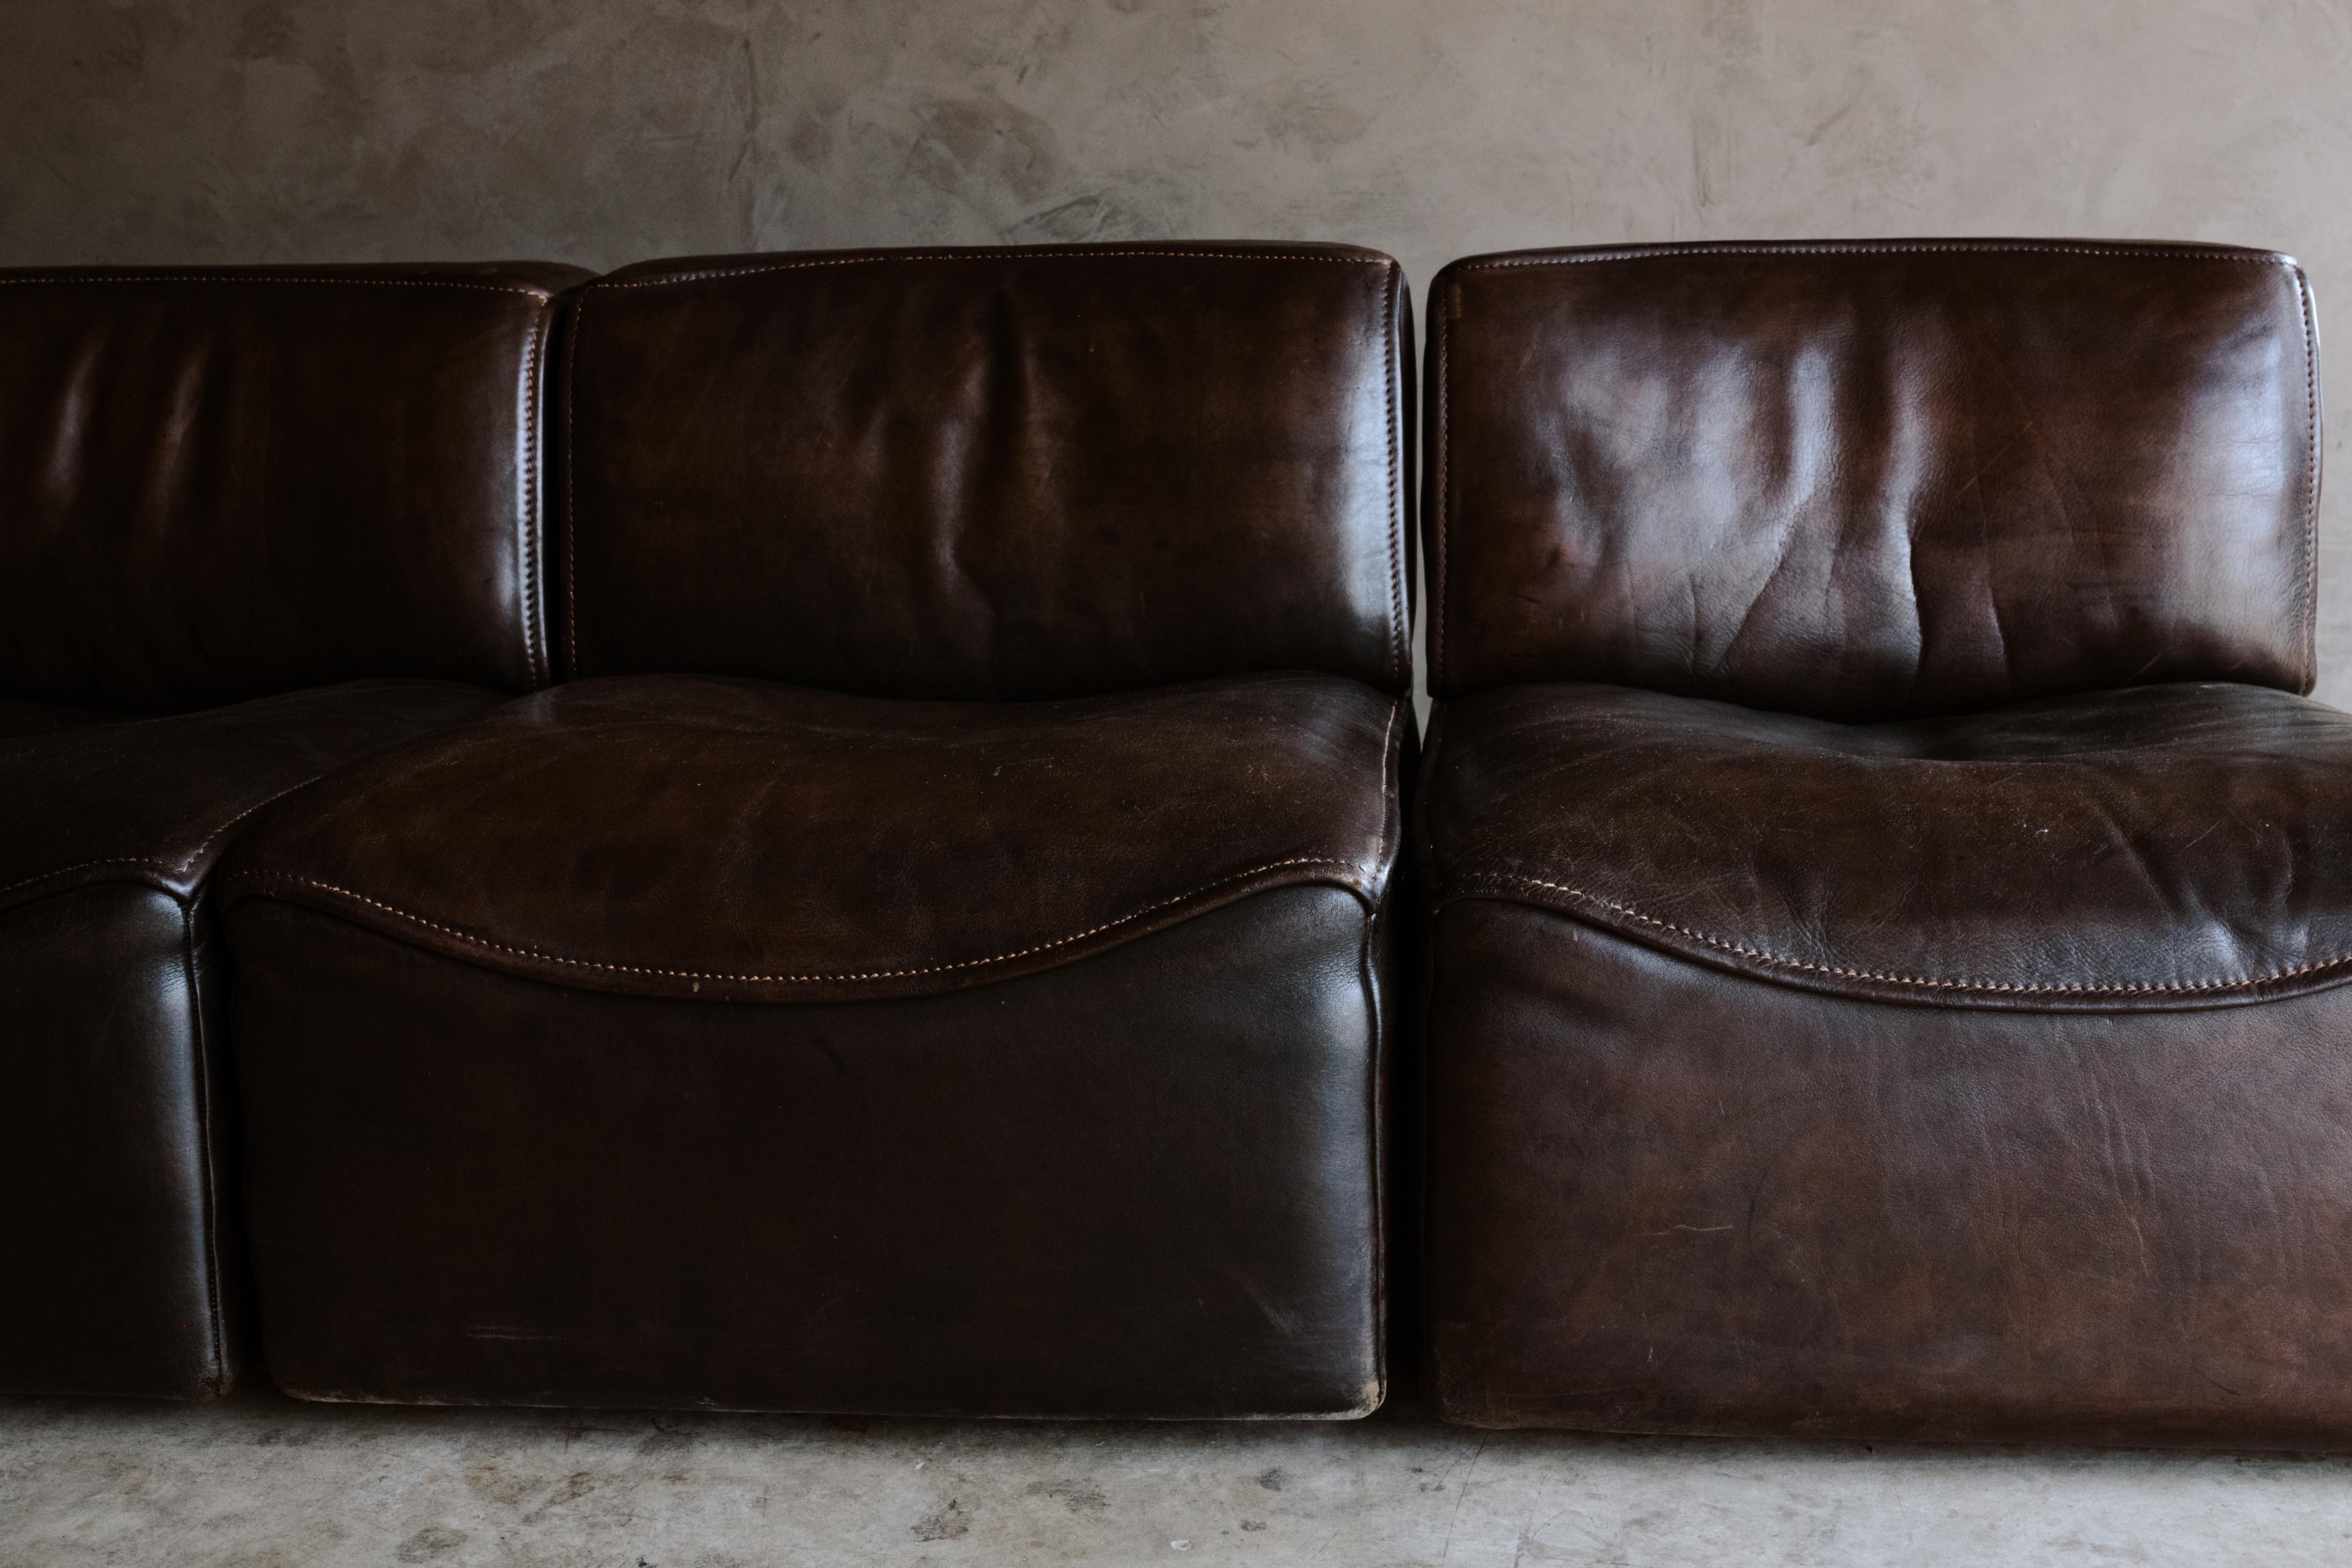 De Sede 'Ds-15' Modular Sofa in Buffalo Leather From Switzerland, 1970s. Four modular pieces in very dark brown / black color leather with fantastic patina and wear. Supreme quality and comfort. Each element is 25